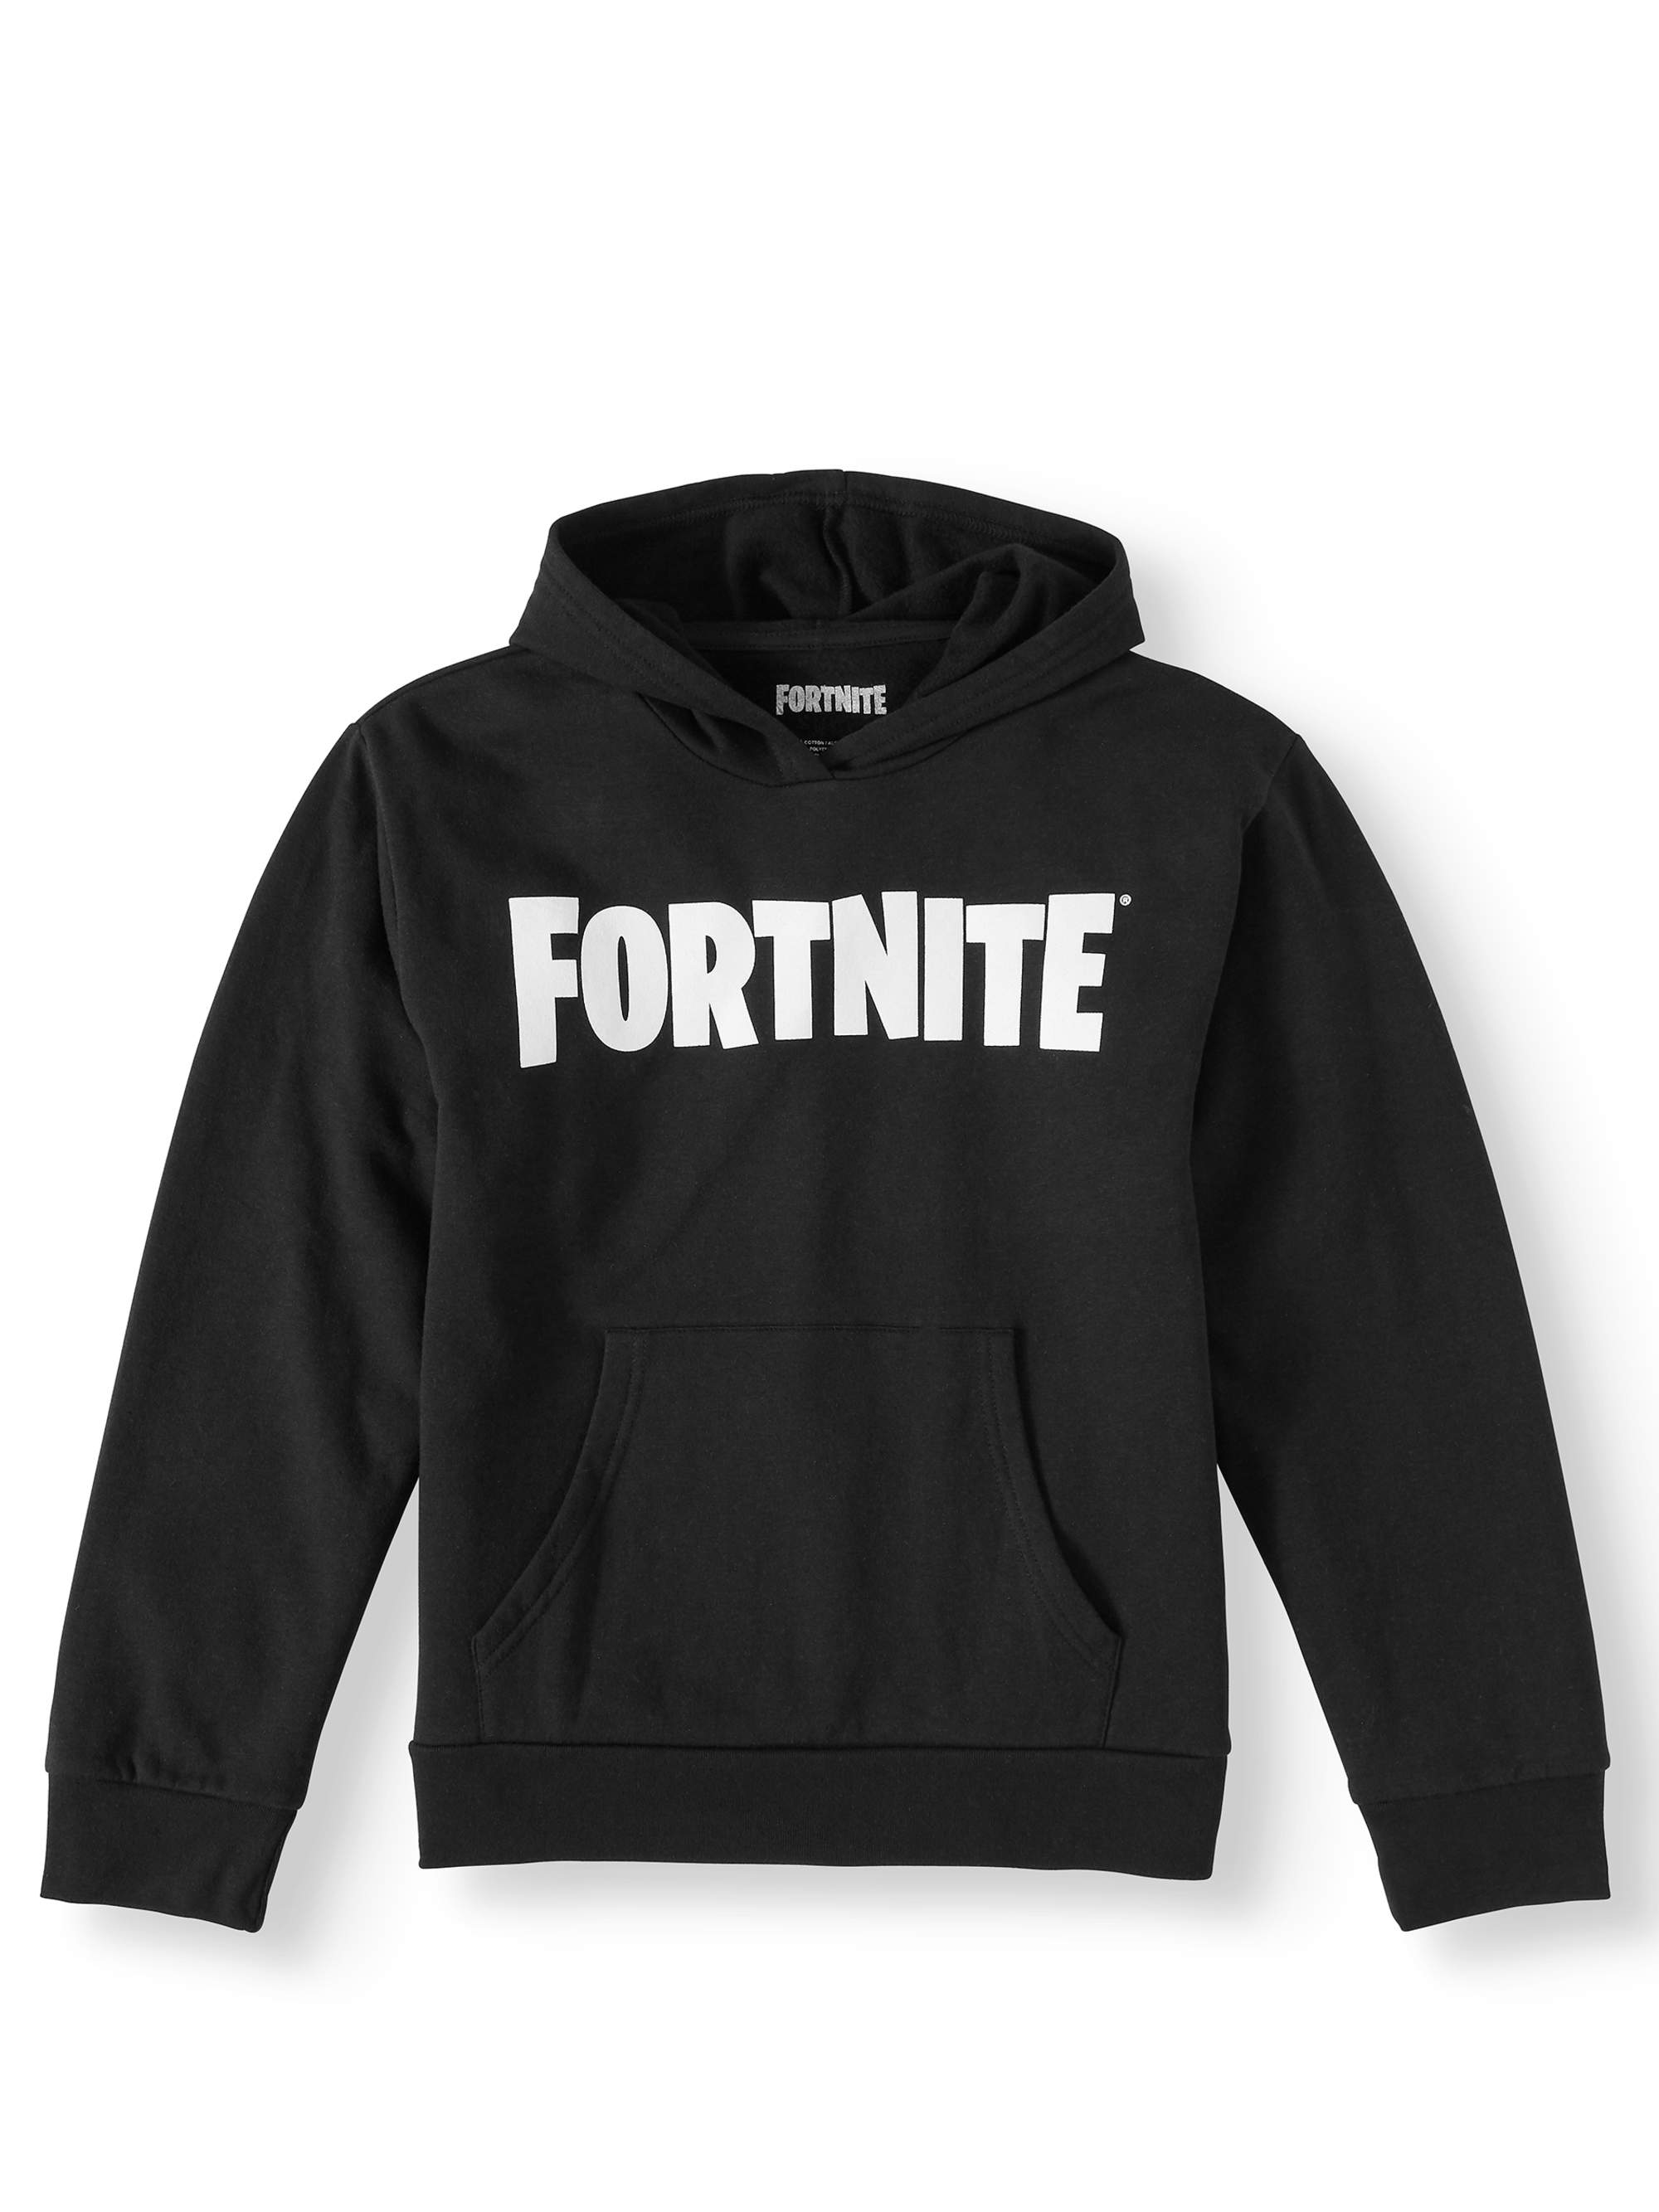 Epic Games by Fortnite Long Sleeve Graphic Pullover Hooded Relaxed Fit Sweatshirt (Little Boys or Big Boys) 1 Pack - image 1 of 3